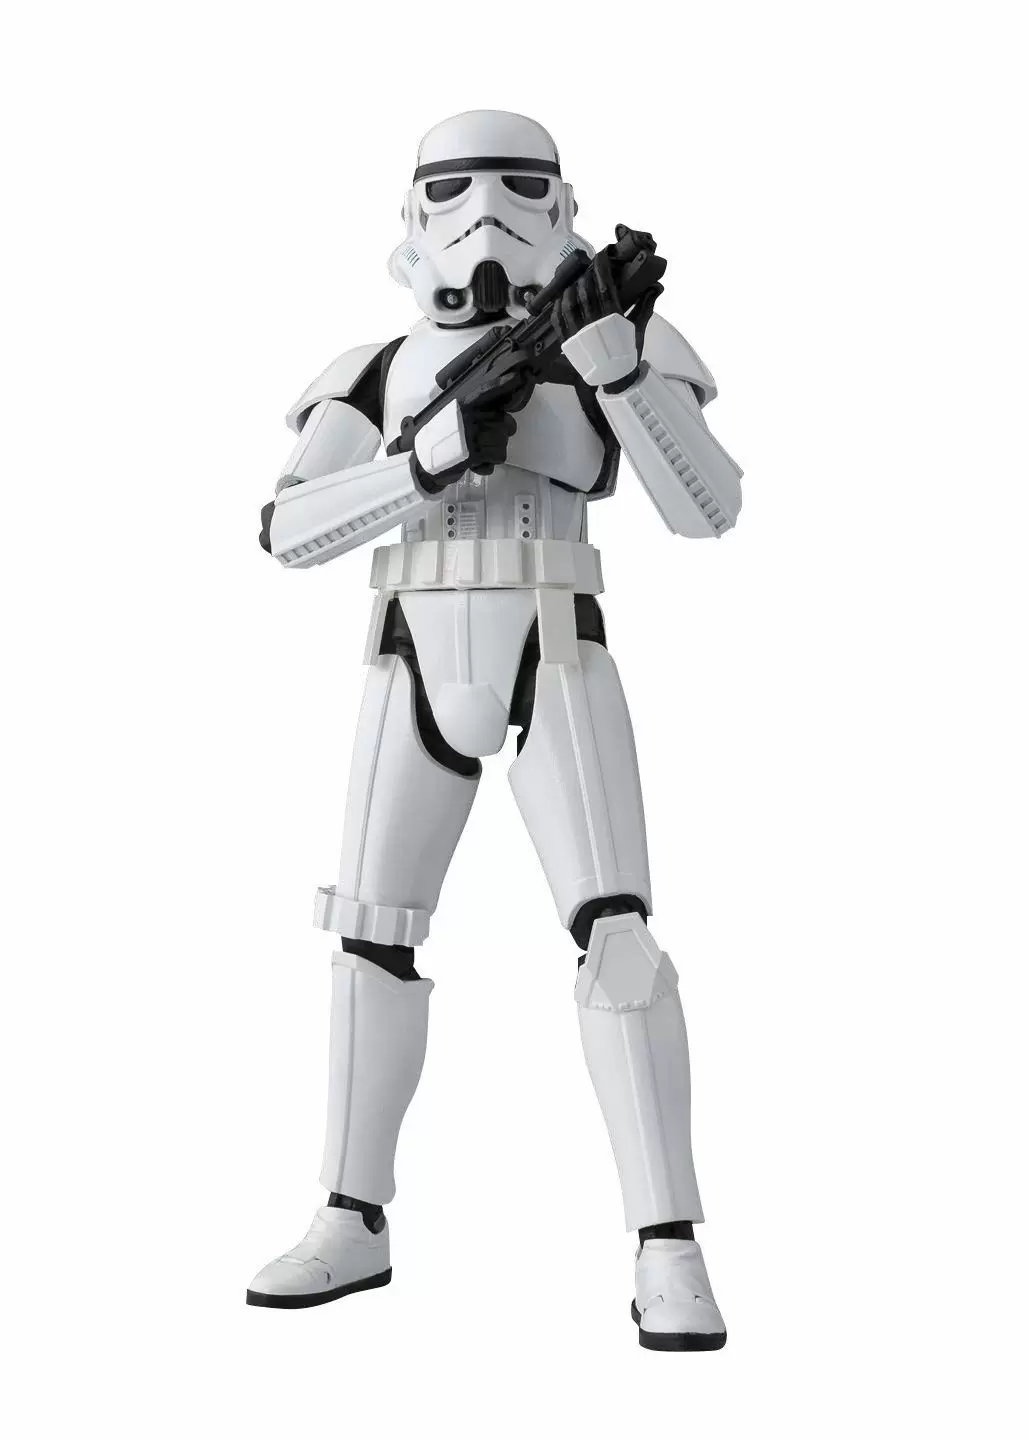 S.H. Figuarts Star Wars - Rogue One - Stormtrooper